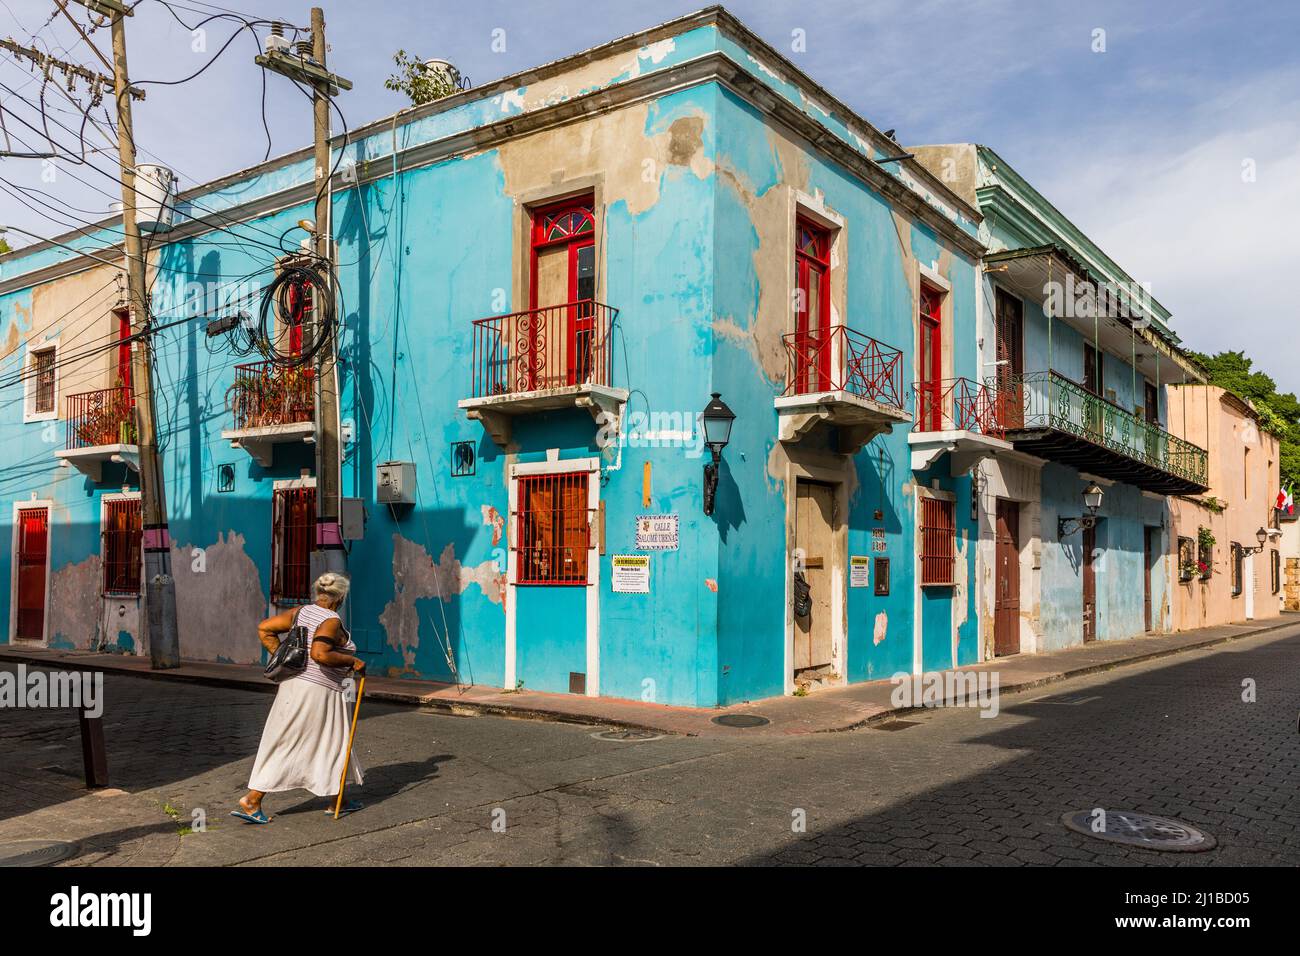 COLORFUL HOUSE, COLONIAL QUARTER LISTED AS A WORLD HERITAGE SITE BY UNESCO, SANTO DOMINGO, DOMINICAN REPUBLIC Stock Photo